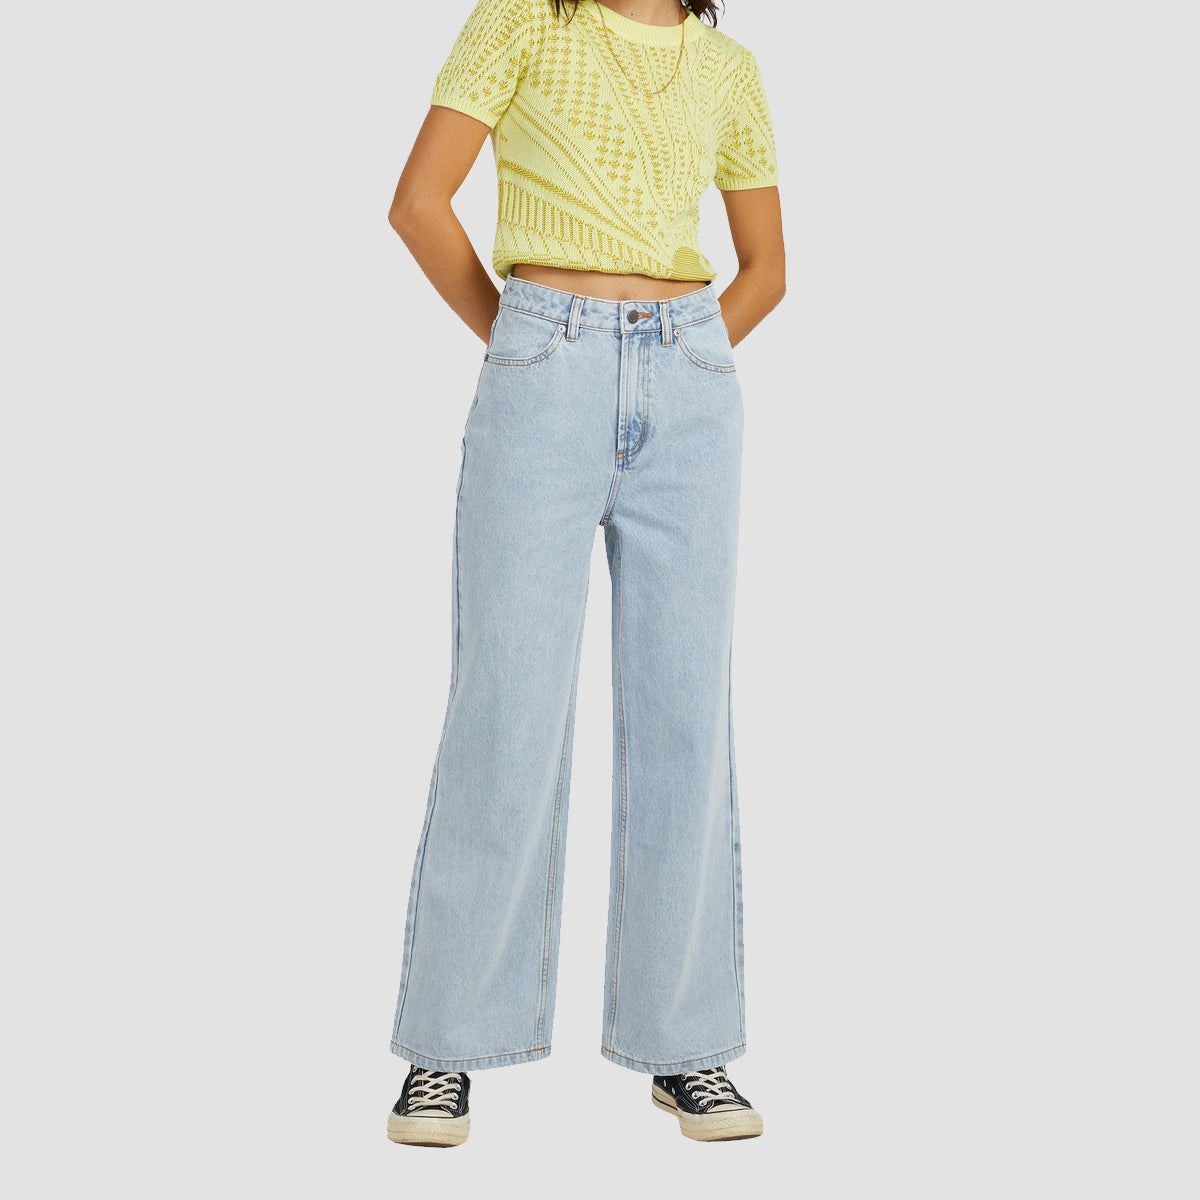 RVCA Coco High-Waisted Jeans Light Vintage Wash - Womens